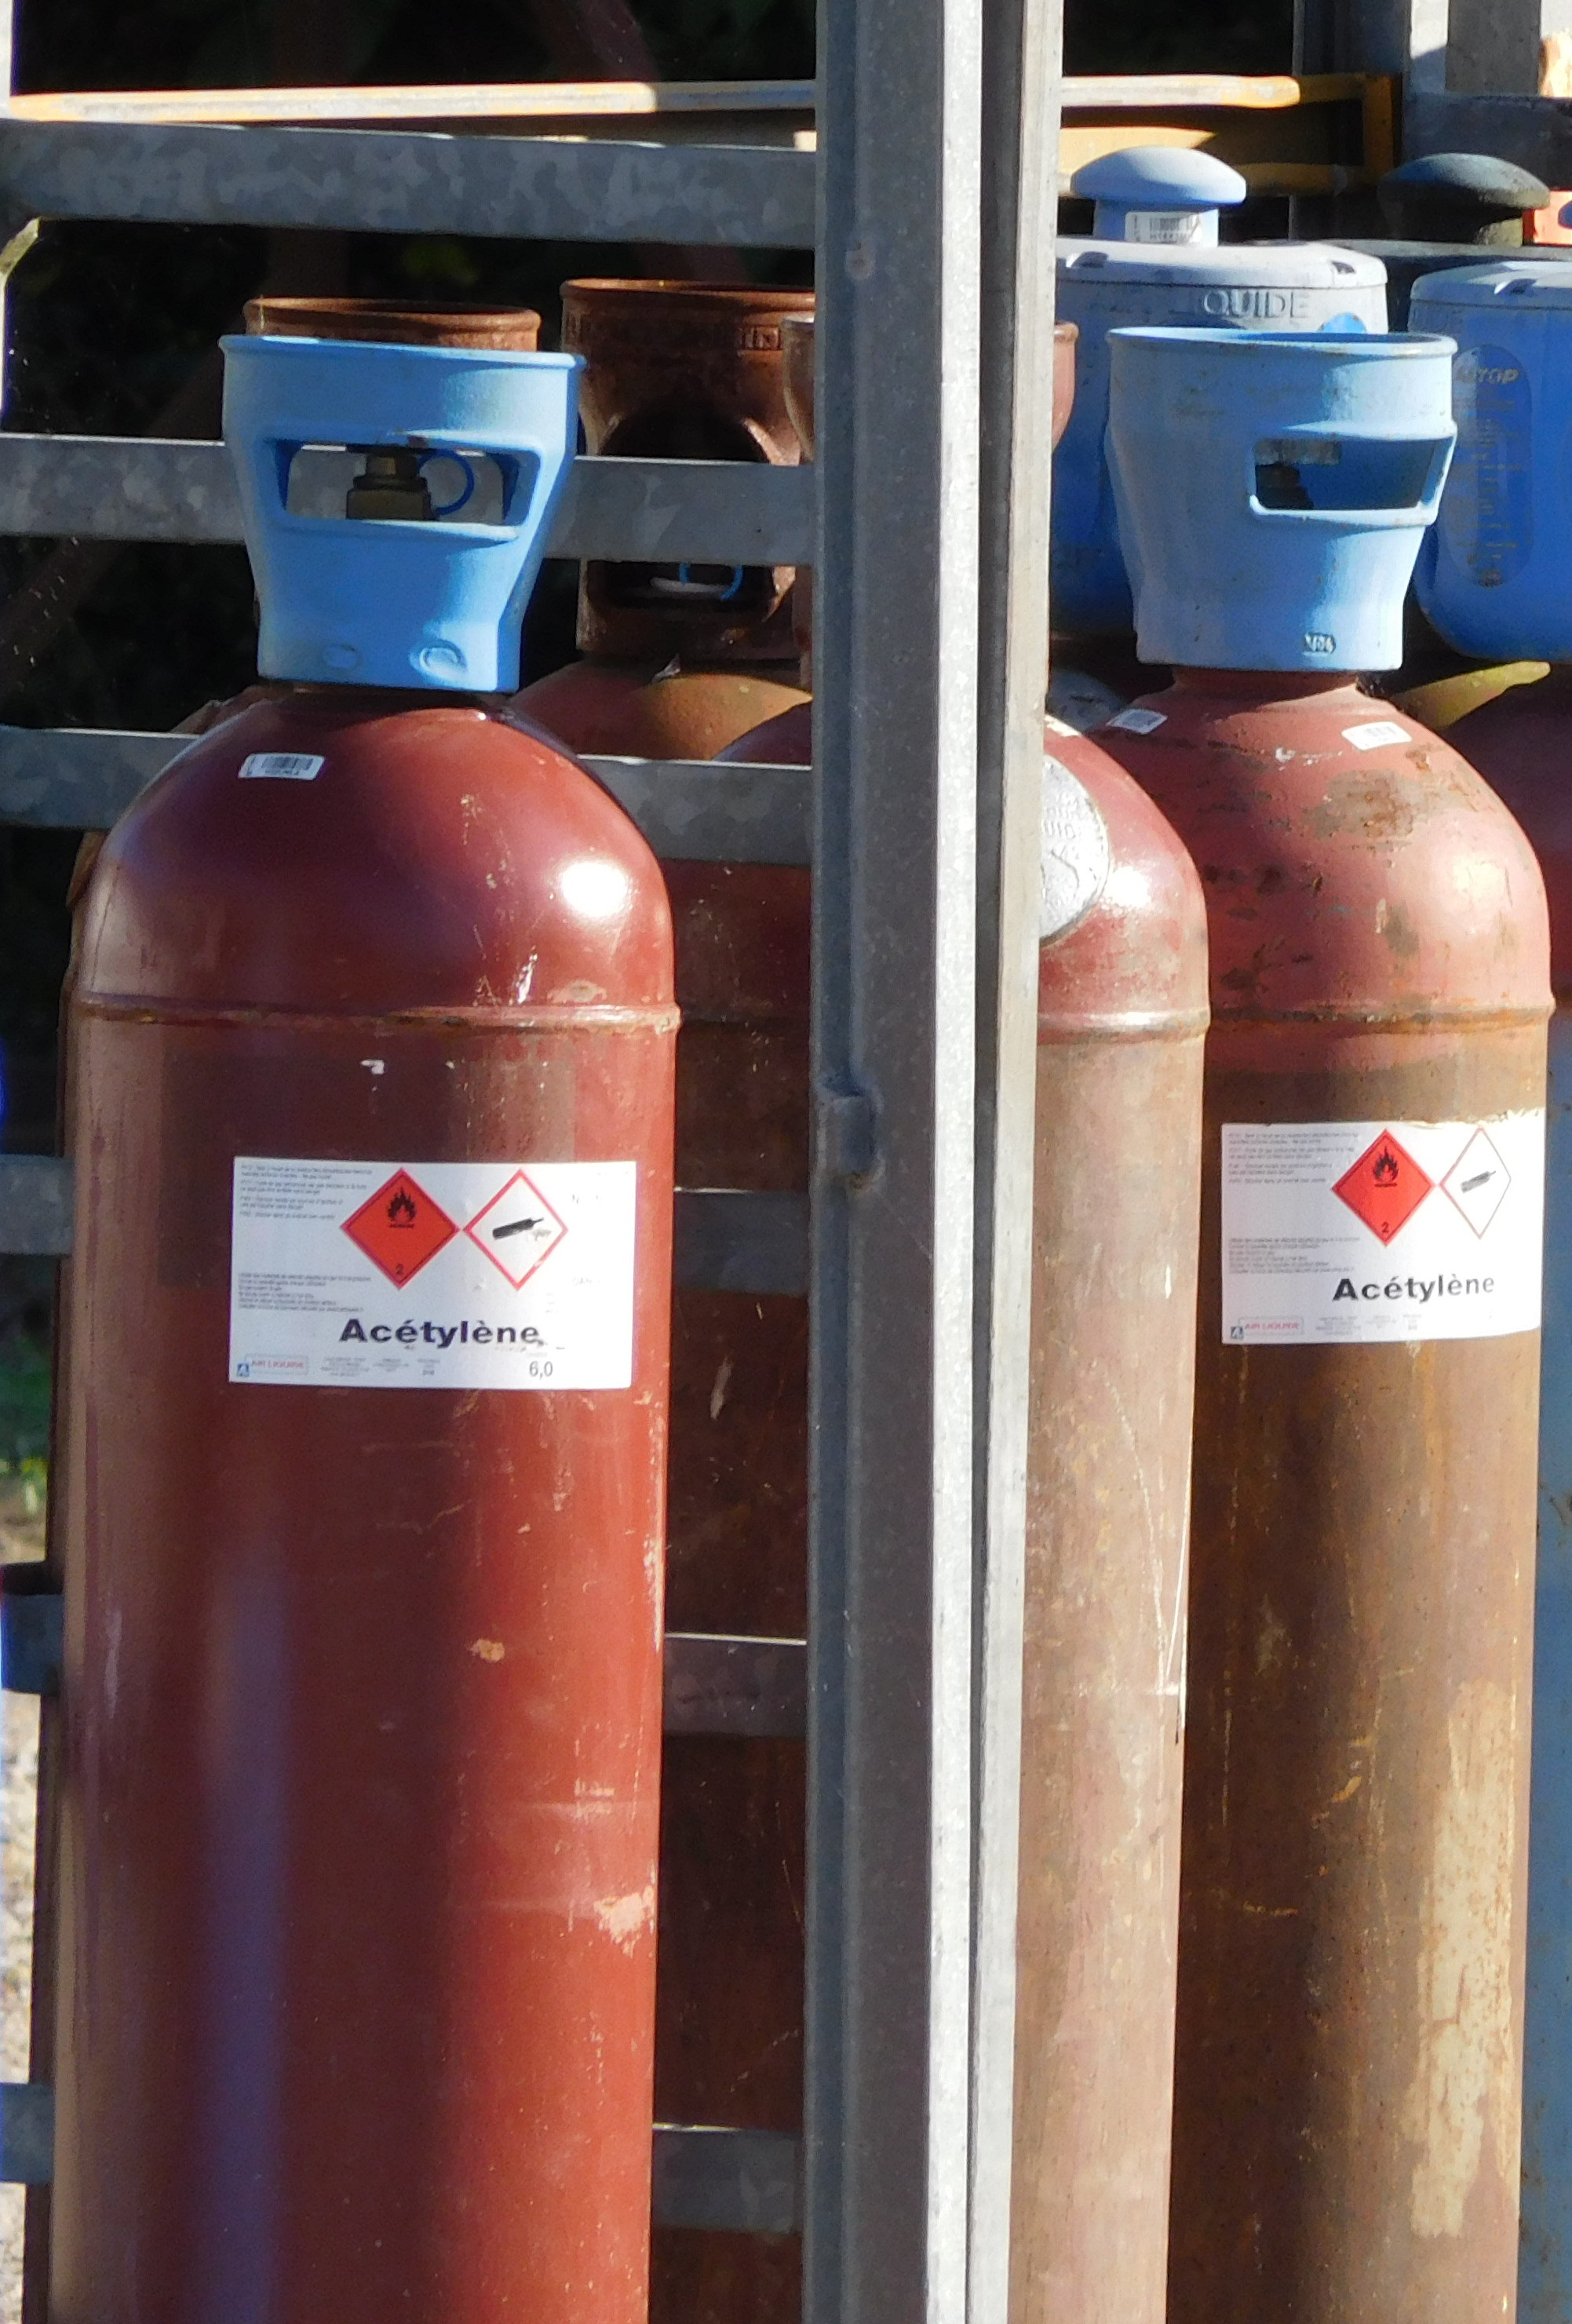 File:Acetylene cylinders by Air liquide.jpg - Wikimedia Commons